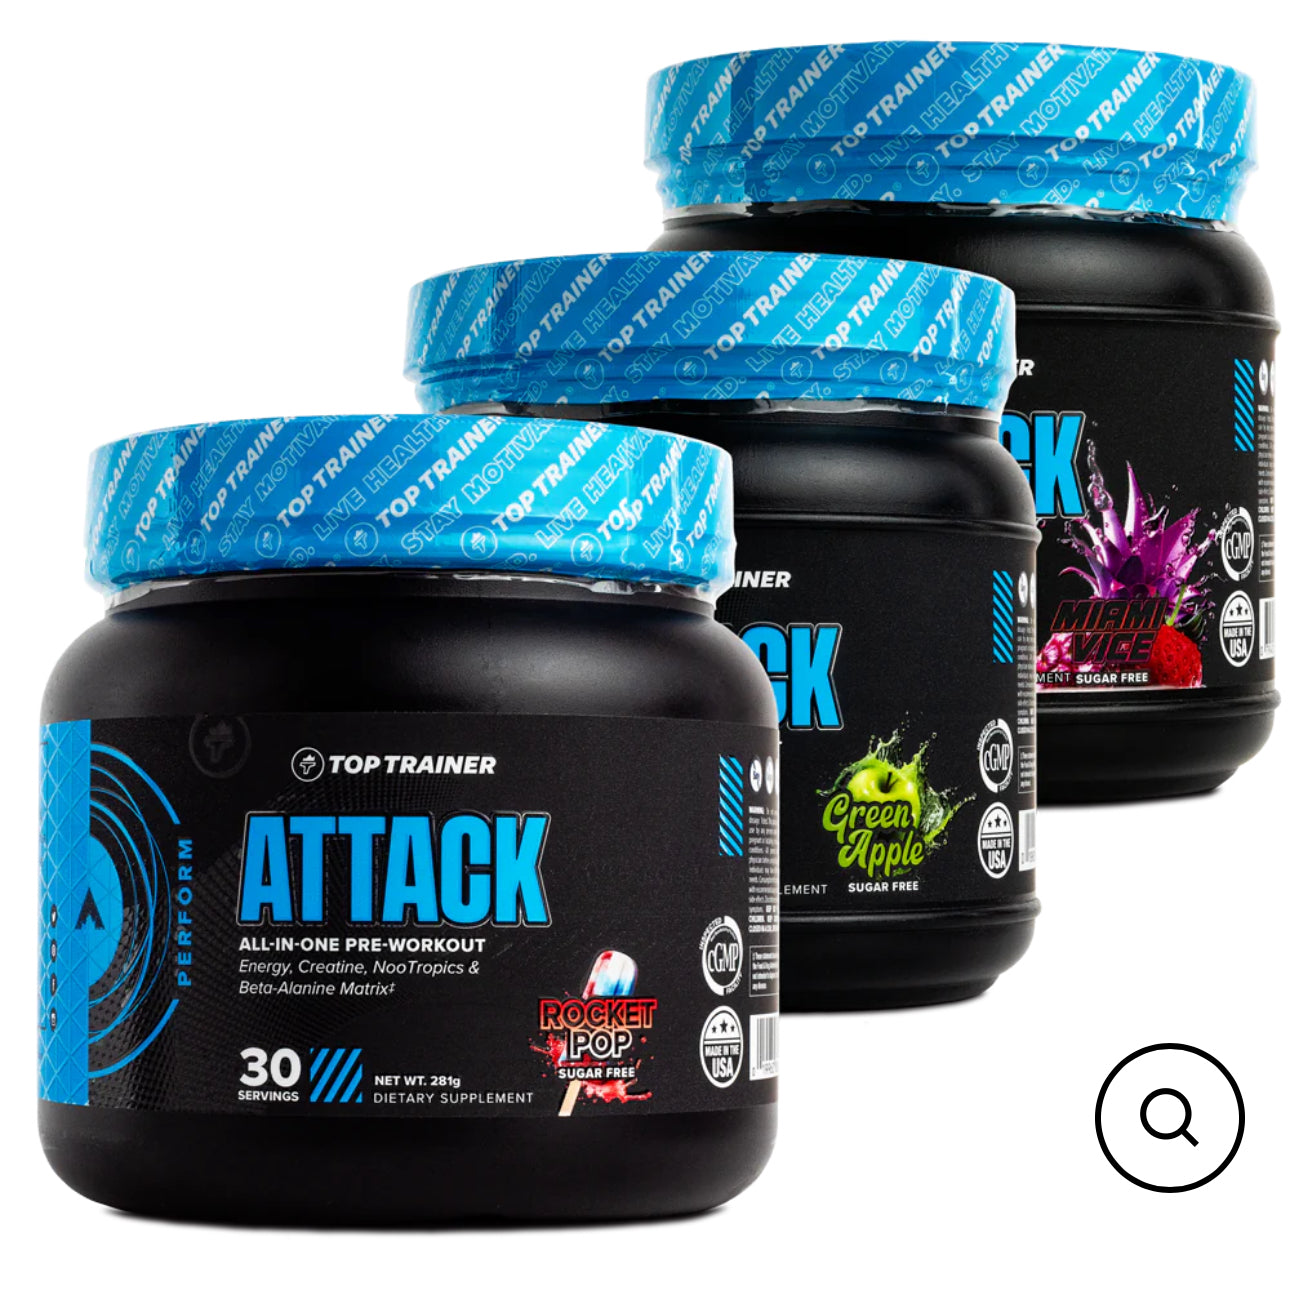 ATTACK™
ALL-IN-ONE PREWORKOUT